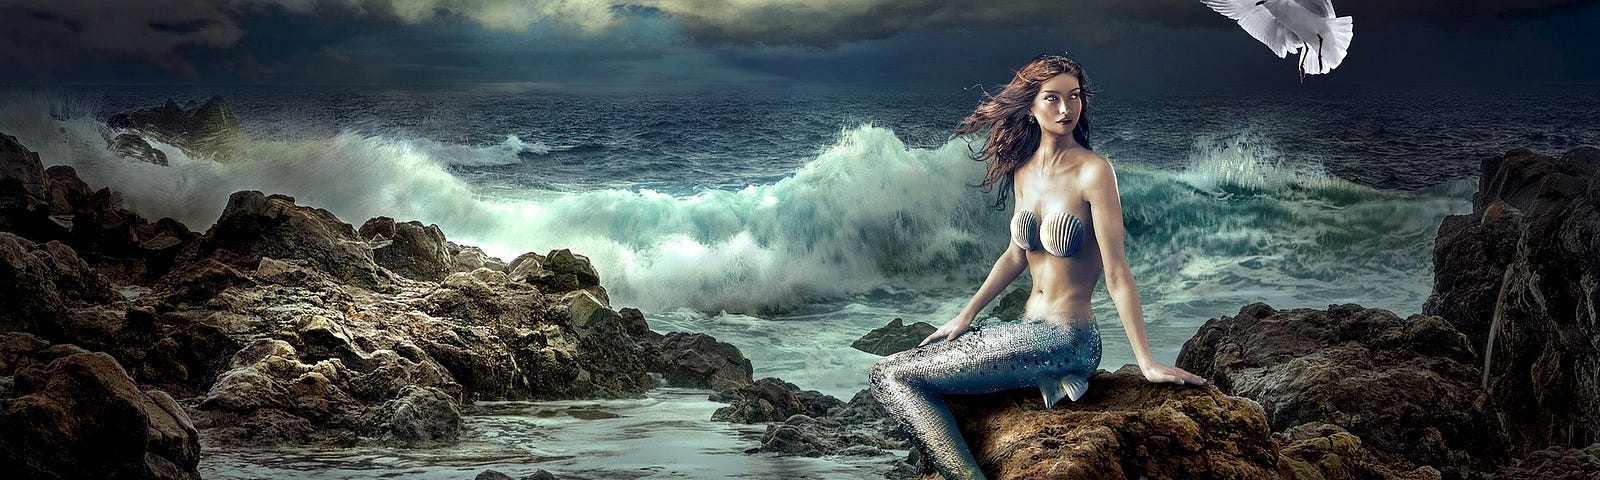 A mermaid sitting on a rock with dark stormy seas and sky in the background